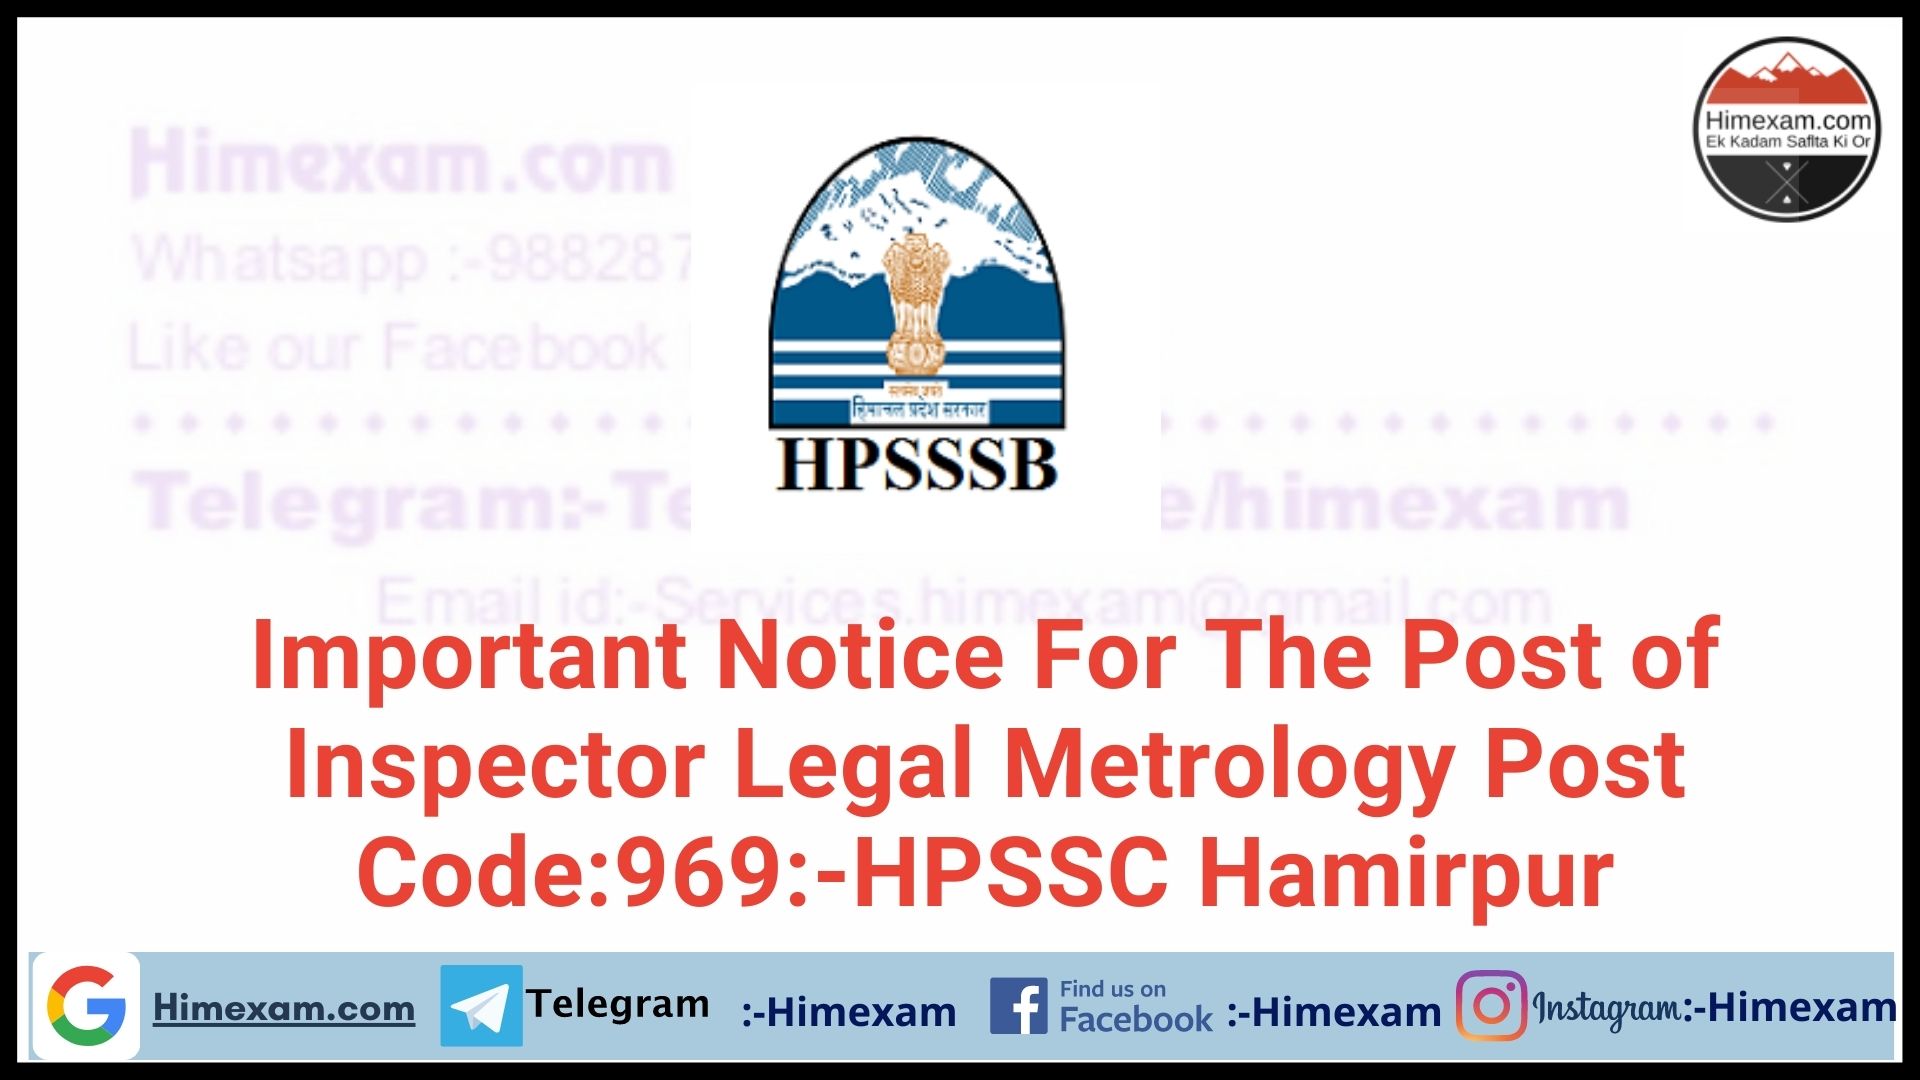 Important Notice For The Post of Inspector Legal Metrology Post Code:969:-HPSSC Hamirpur